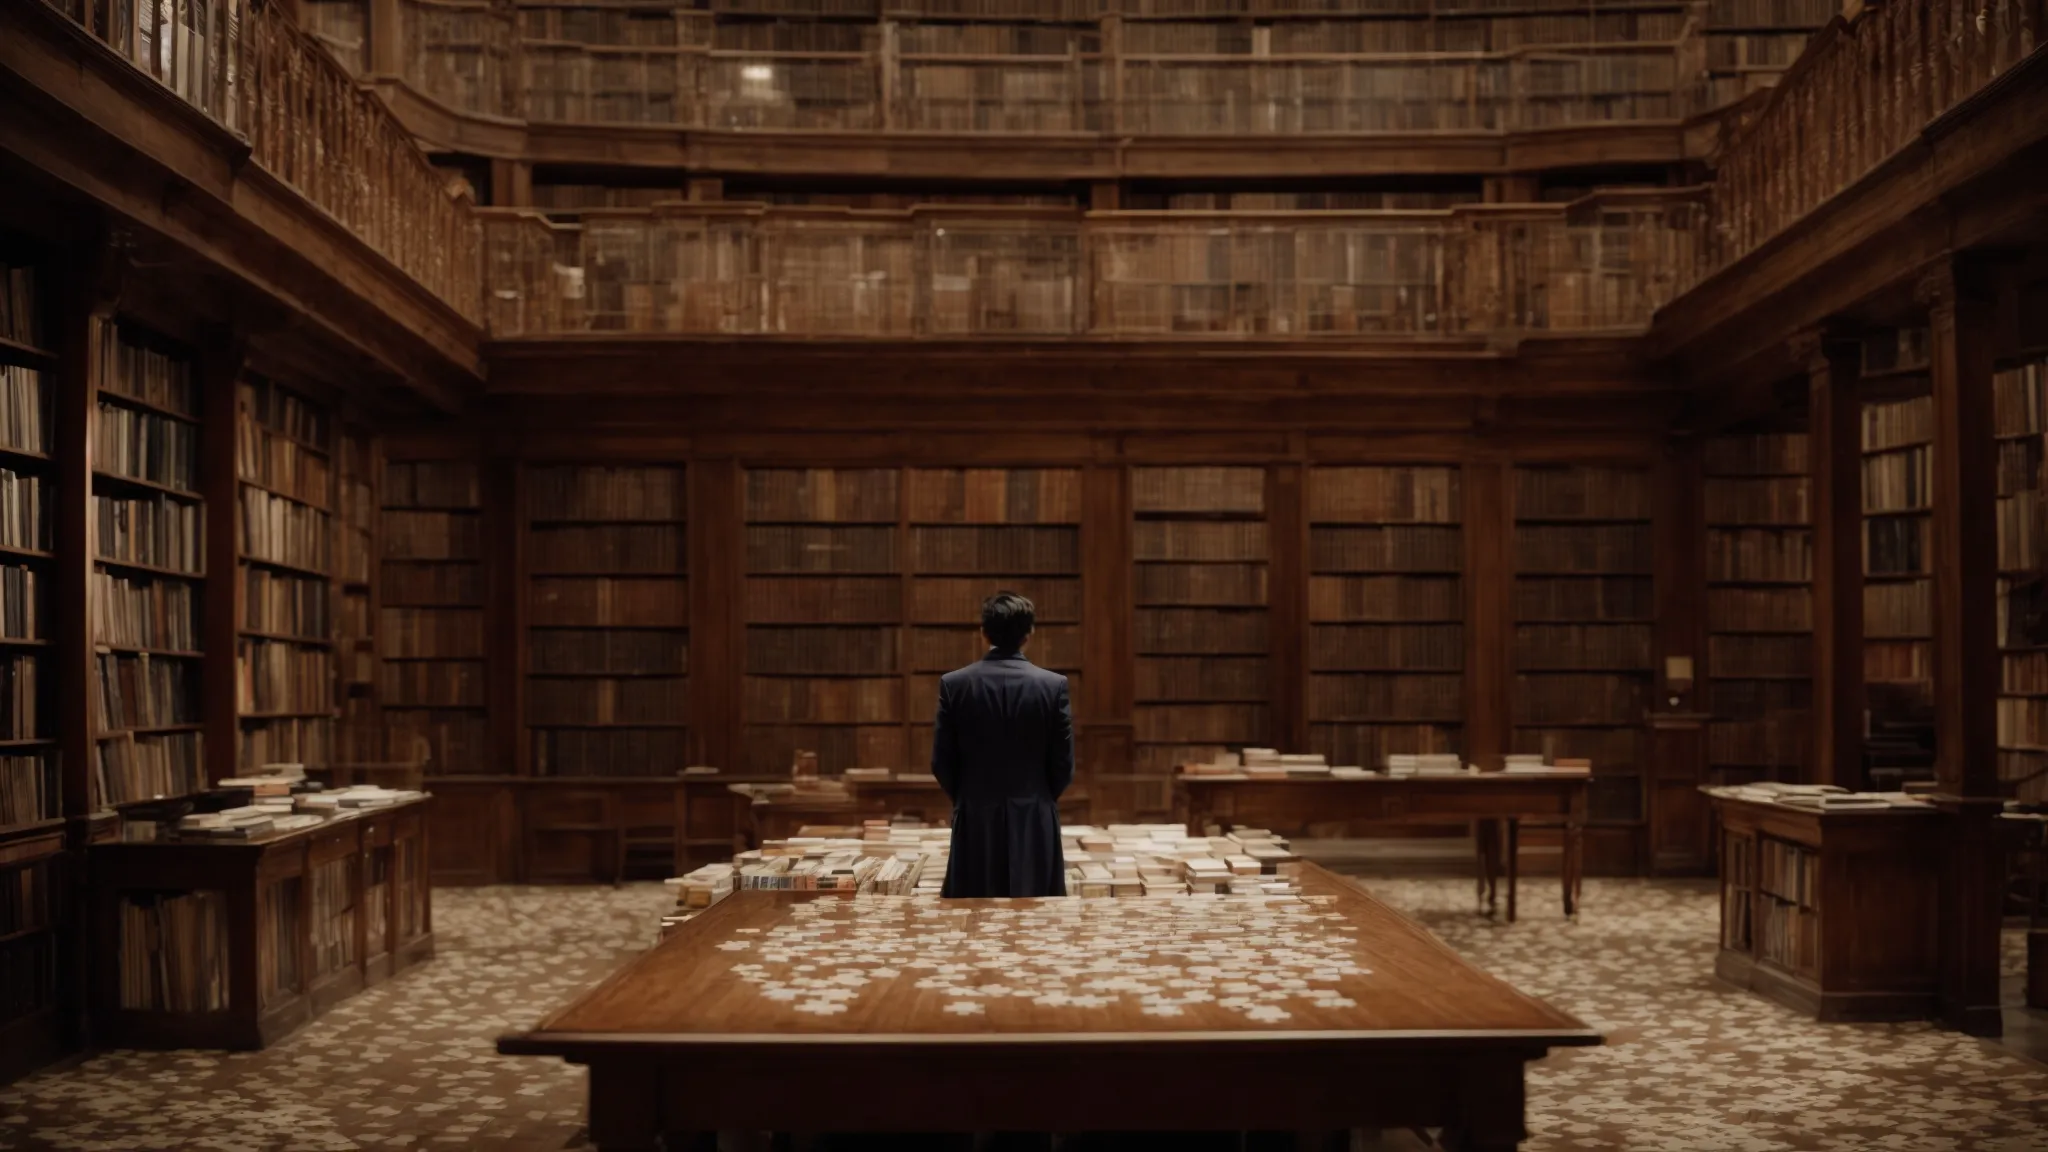 a person stands in a vast, open library, surrounded by overflowing bookshelves, looking puzzled with a giant, complex puzzle on a table before them, symbolizing the challenge of piecing together audience insights.